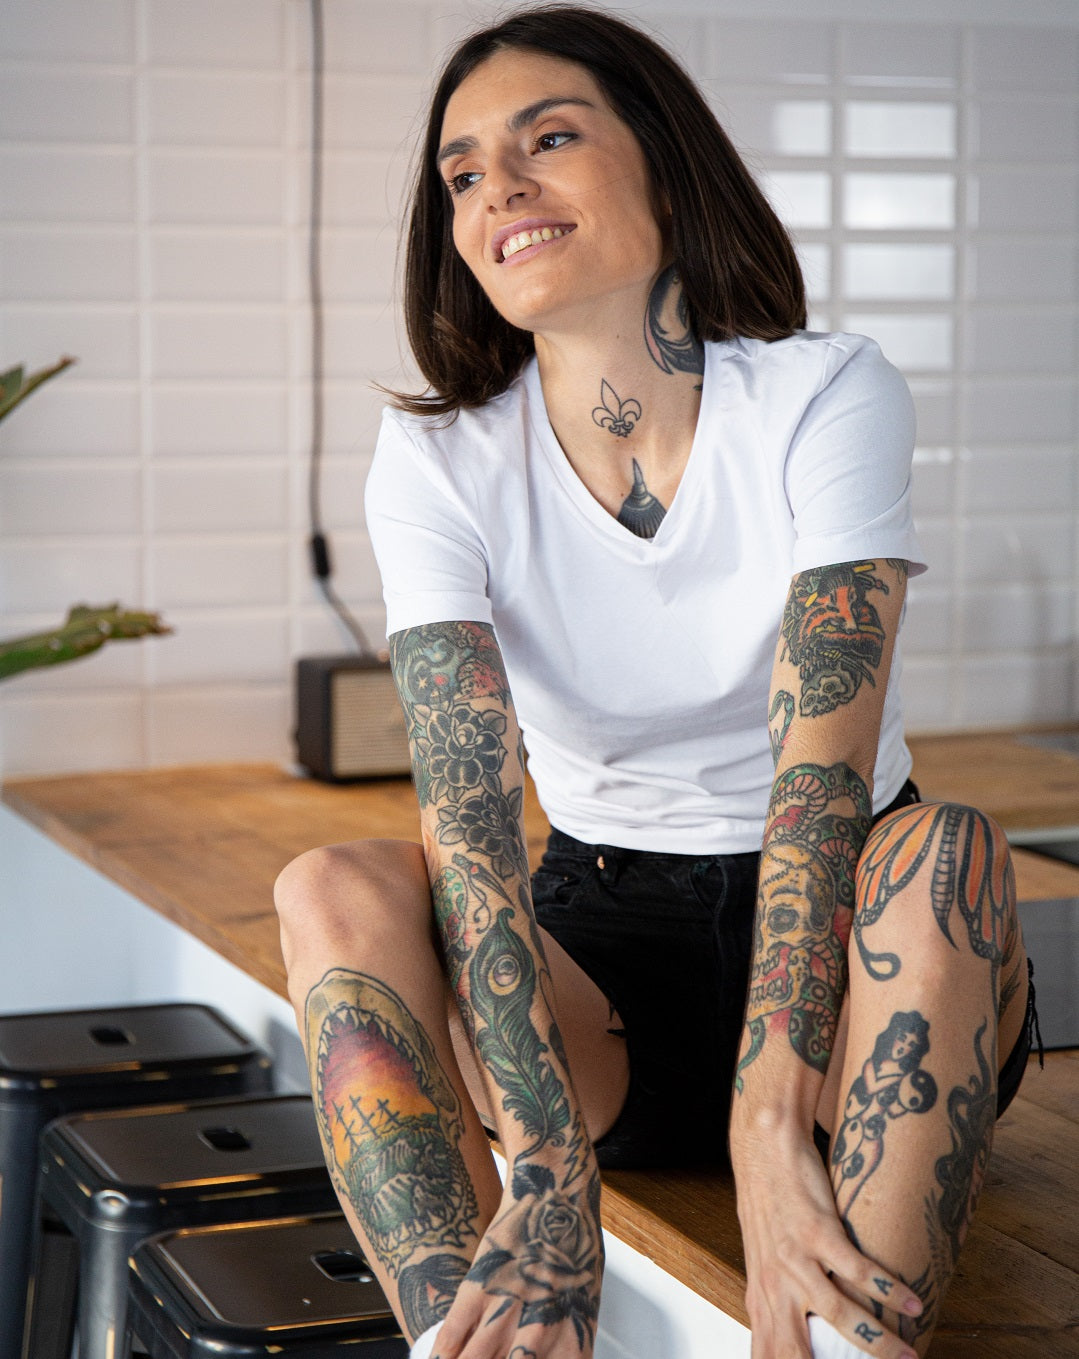 How to design a sleeve tattoo Stories and Ink